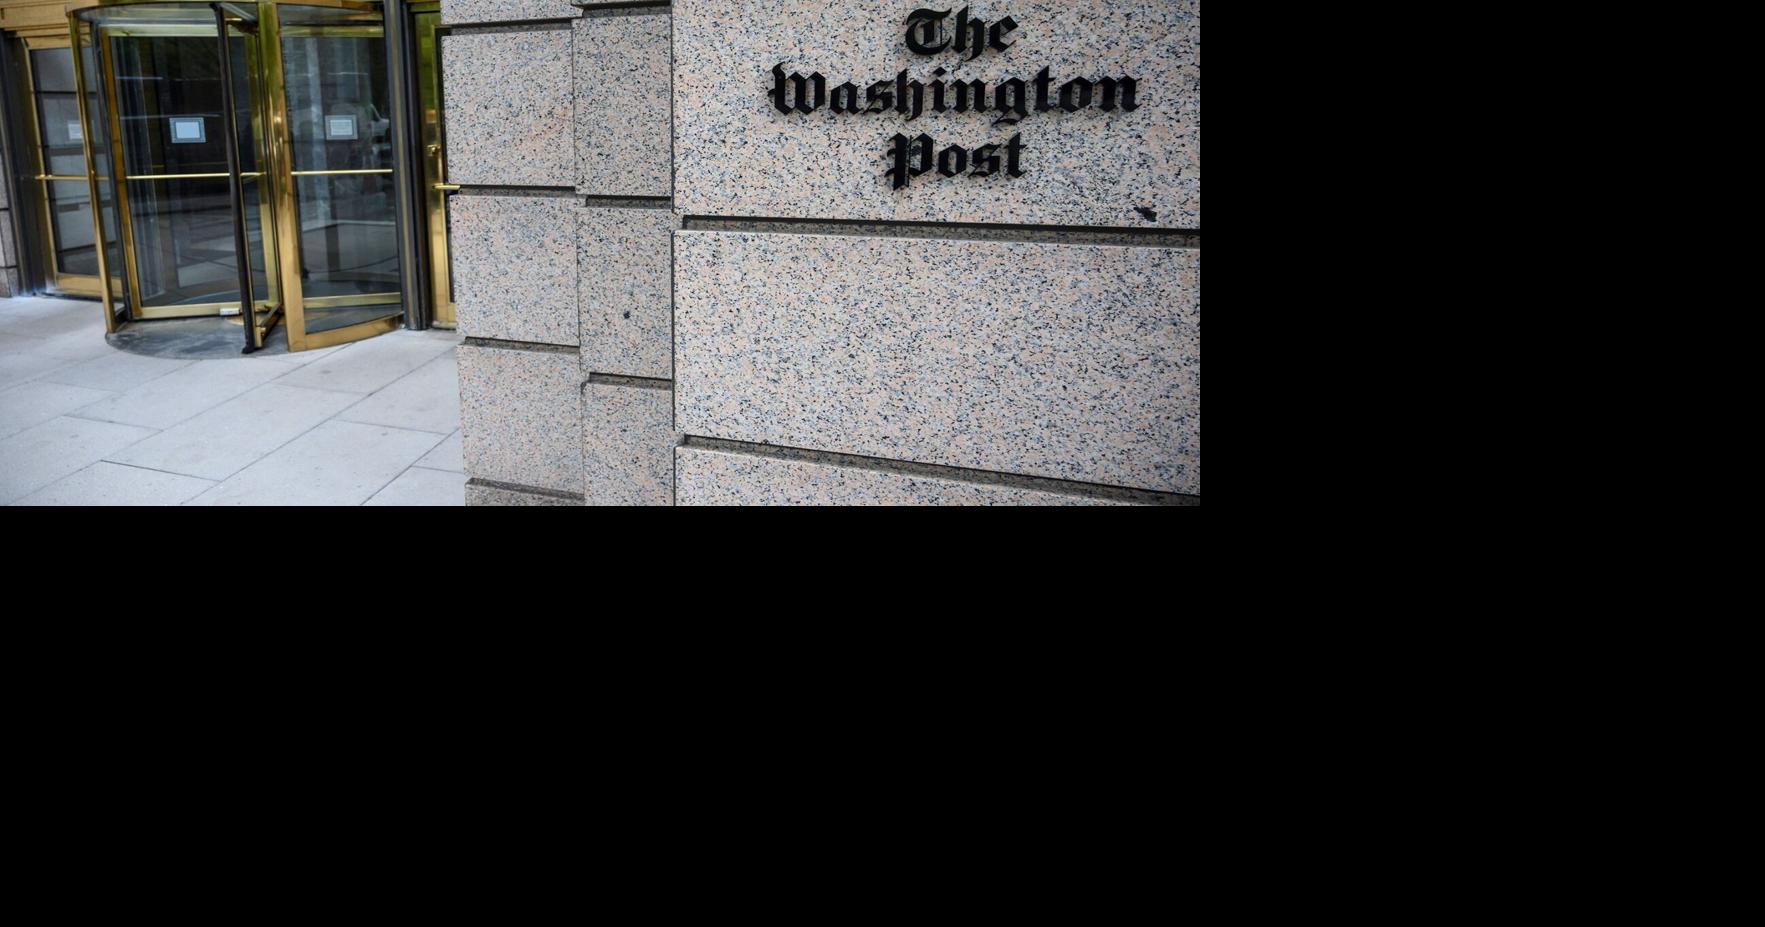 The Washington Post will not name Robert Winnett as editor after report raises ethical questions |  Consumer Monitoring